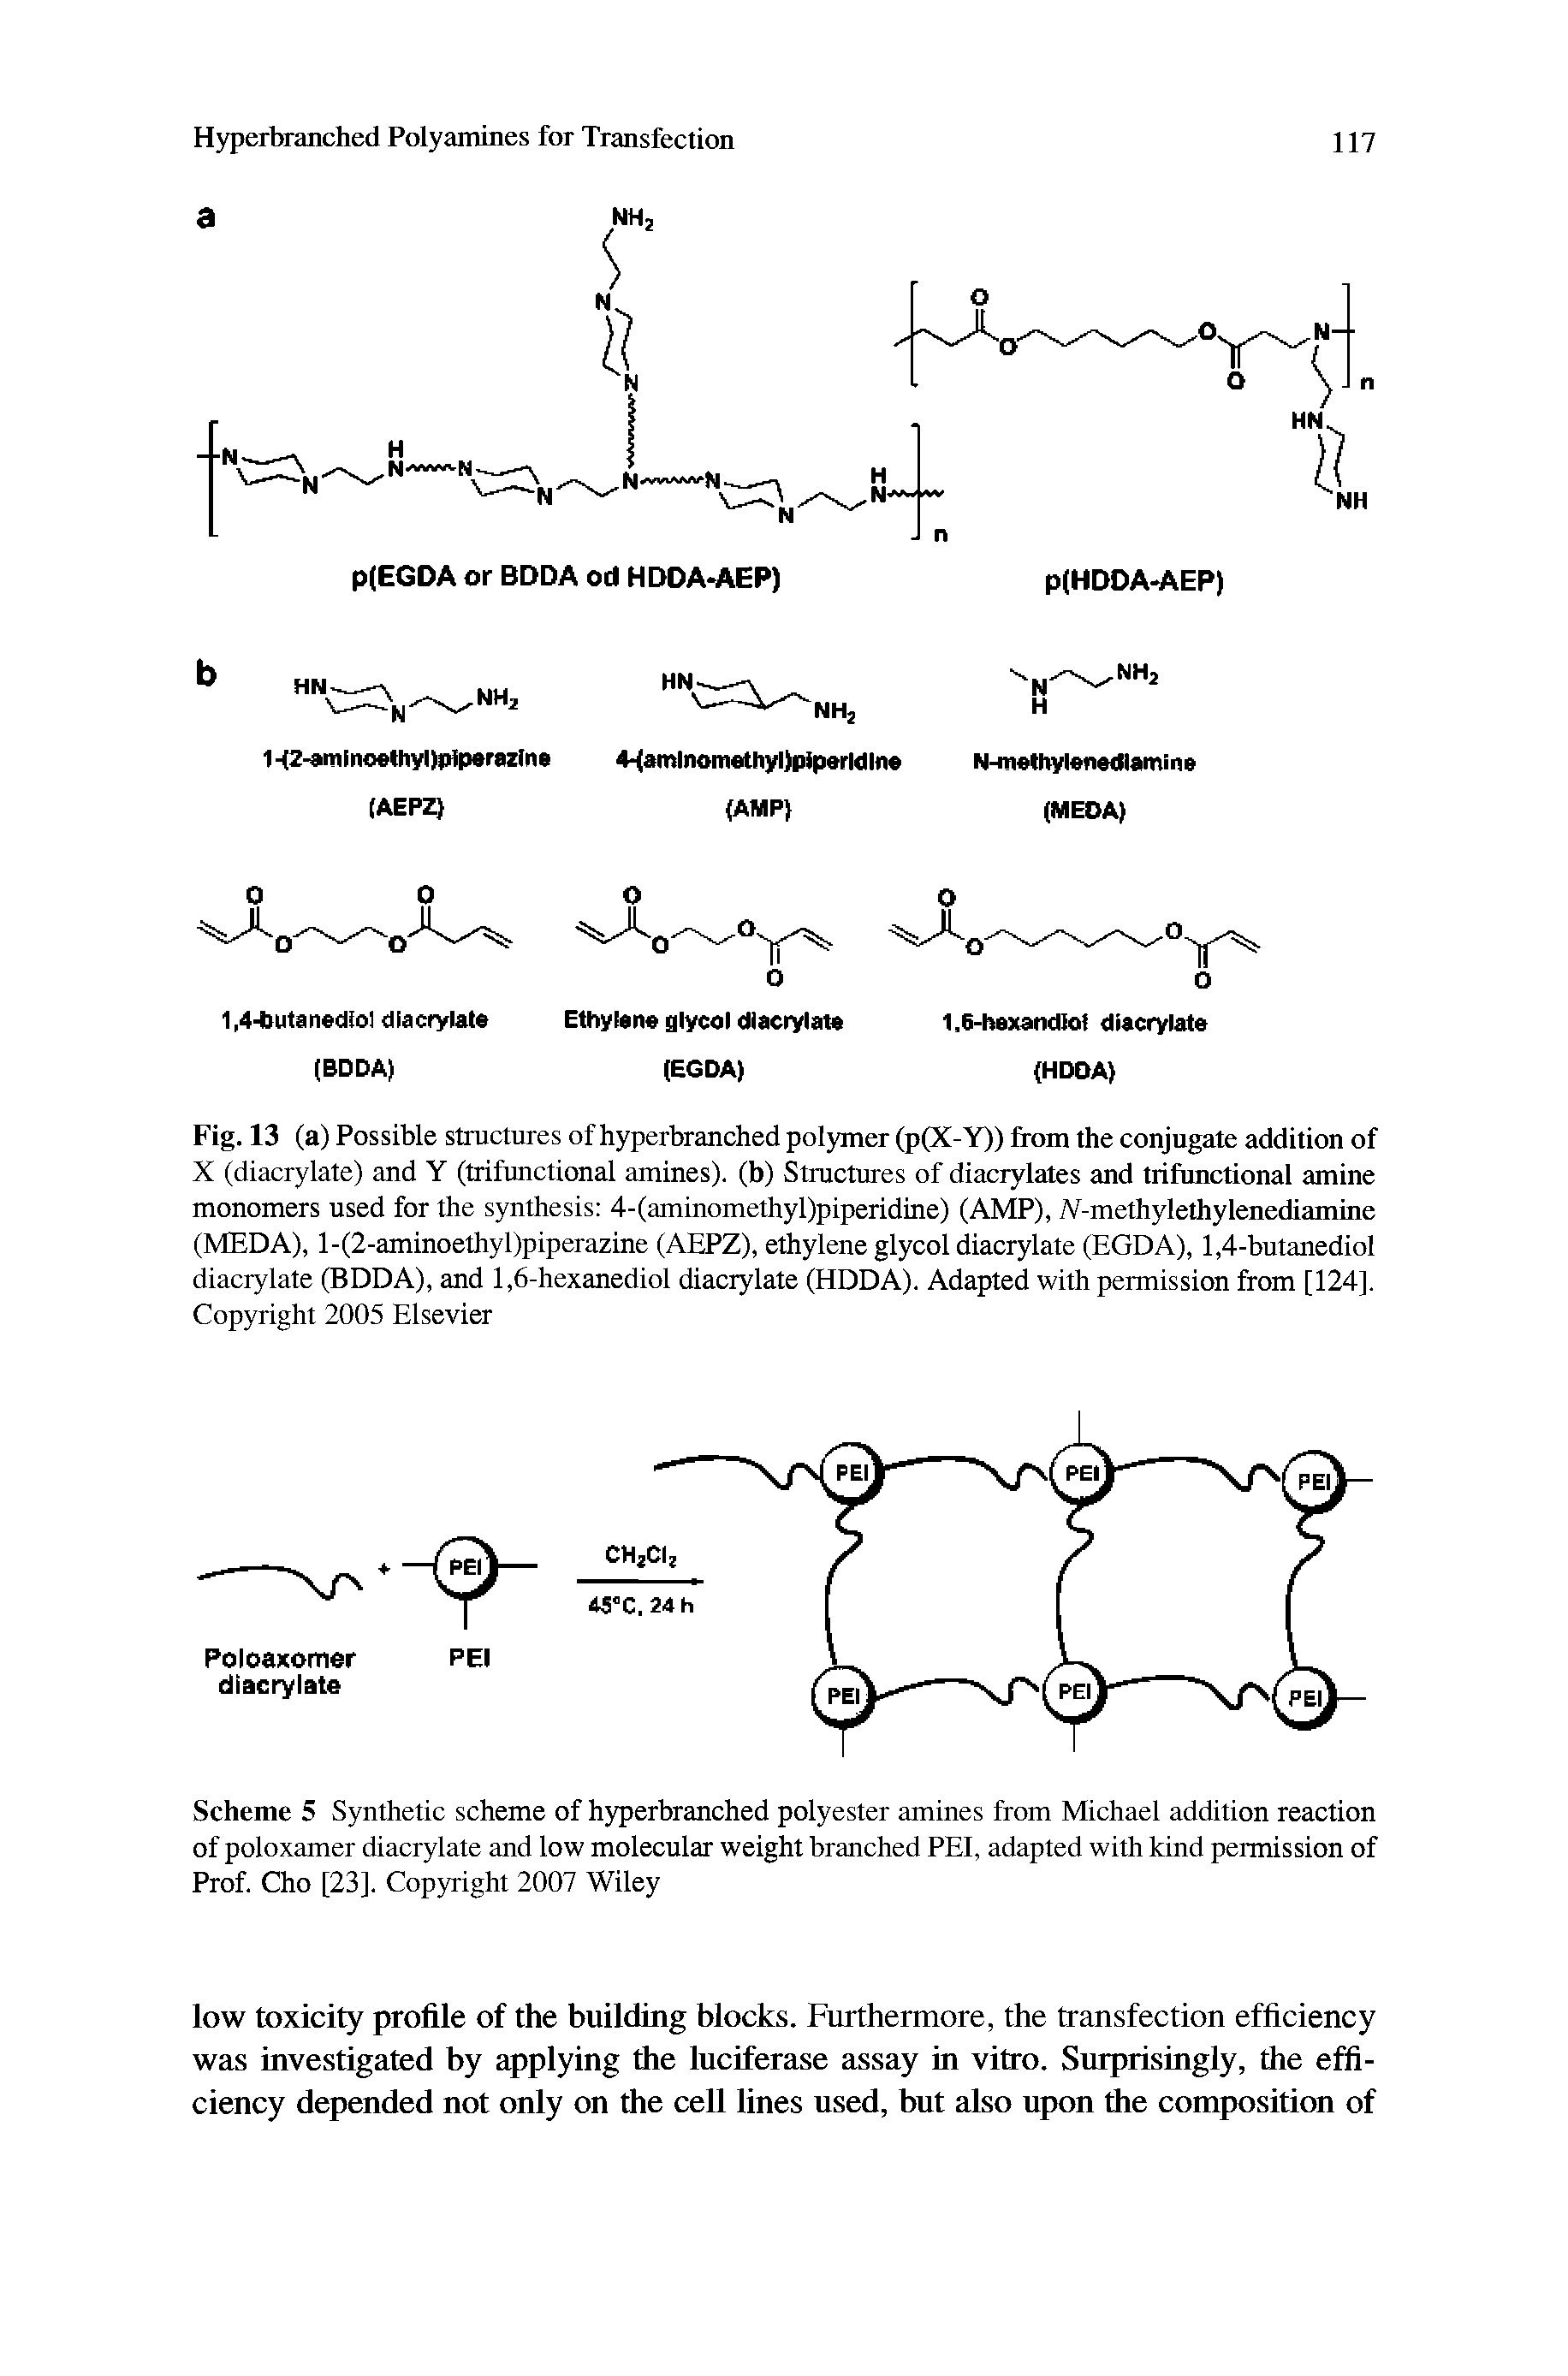 Scheme 5 Synthetic scheme of hyperbranched polyester amines from Michael addition reaction of poloxamer diacrylate and low molecular weight branched PEI, adapted with kind permission of Prof. Cho [23]. Copyright 2007 Wiley...